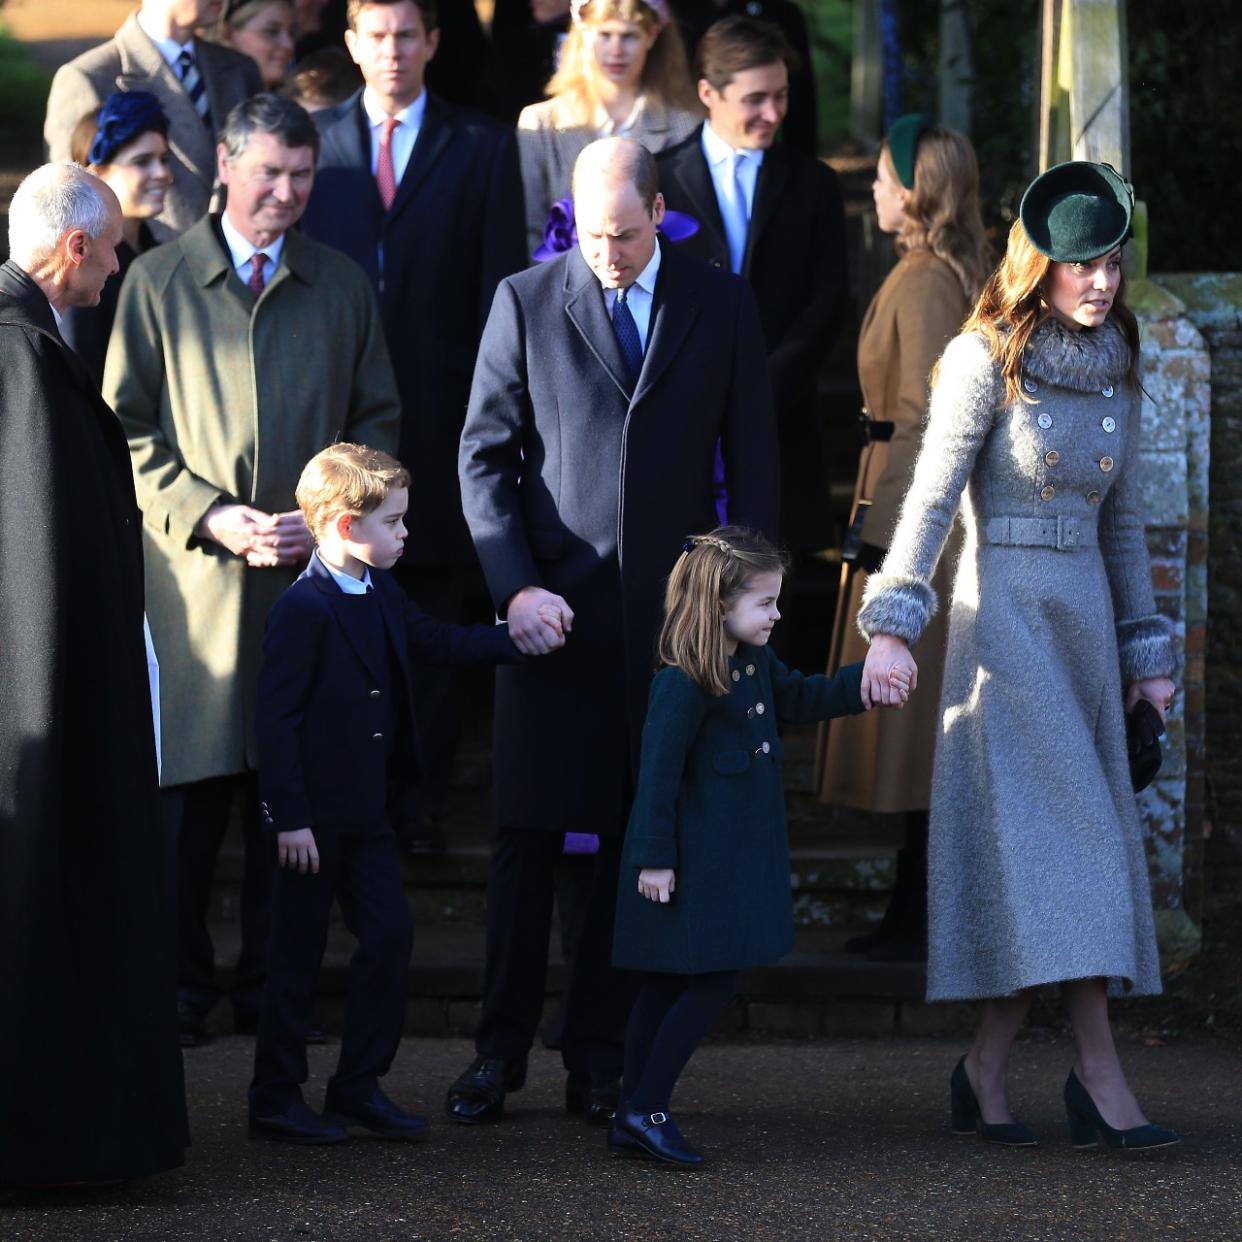  The Royal Family Attend Church On Christmas Day 